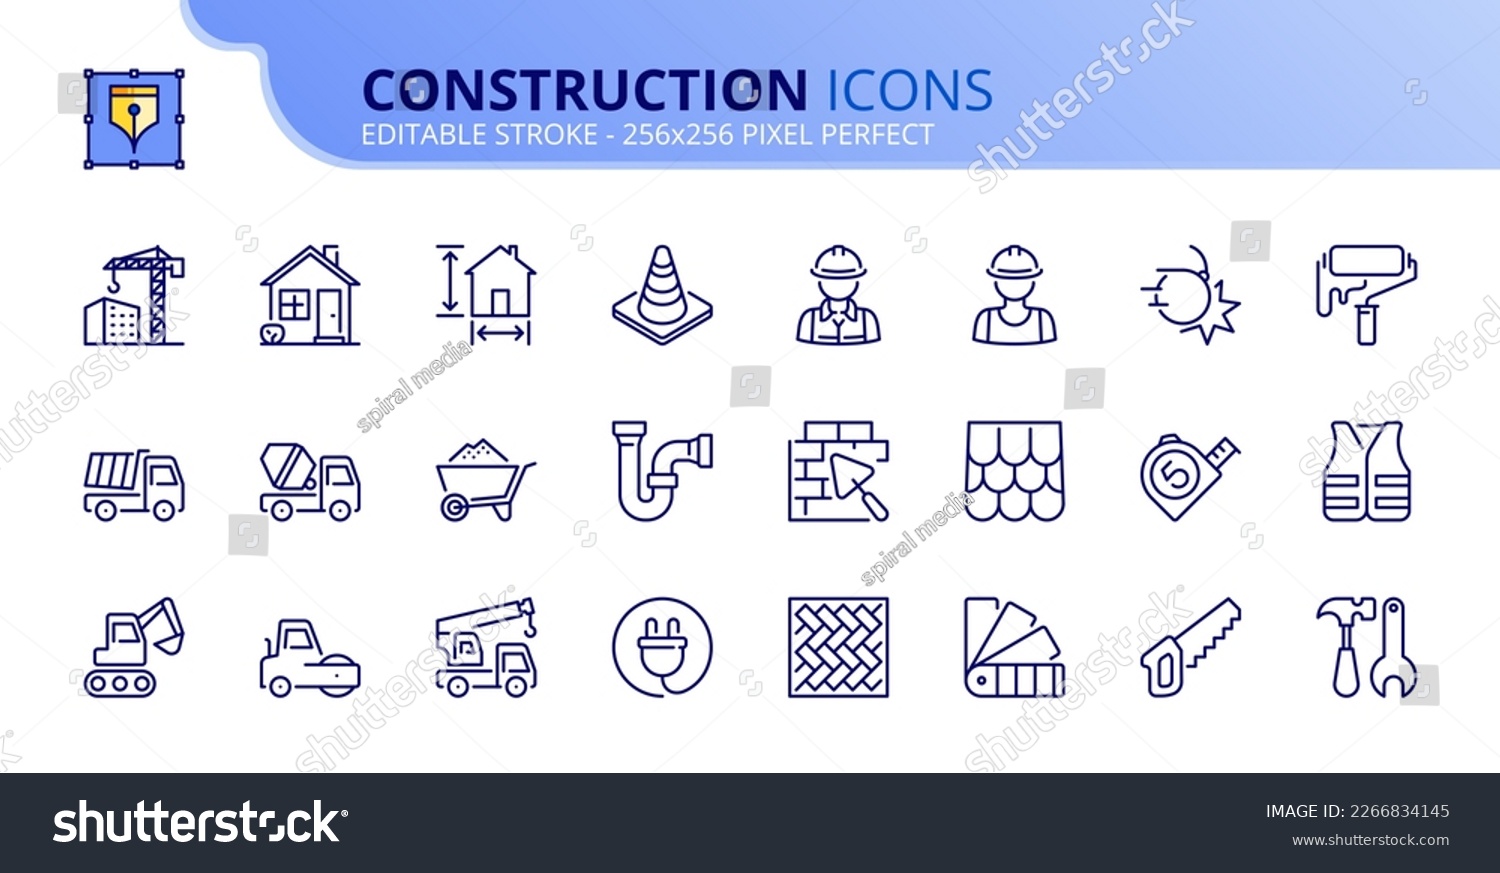 Line icons about construction. Contains such icons as architecture, workers, material, tools and construction vehicles. Editable stroke Vector 256x256 pixel perfect #2266834145